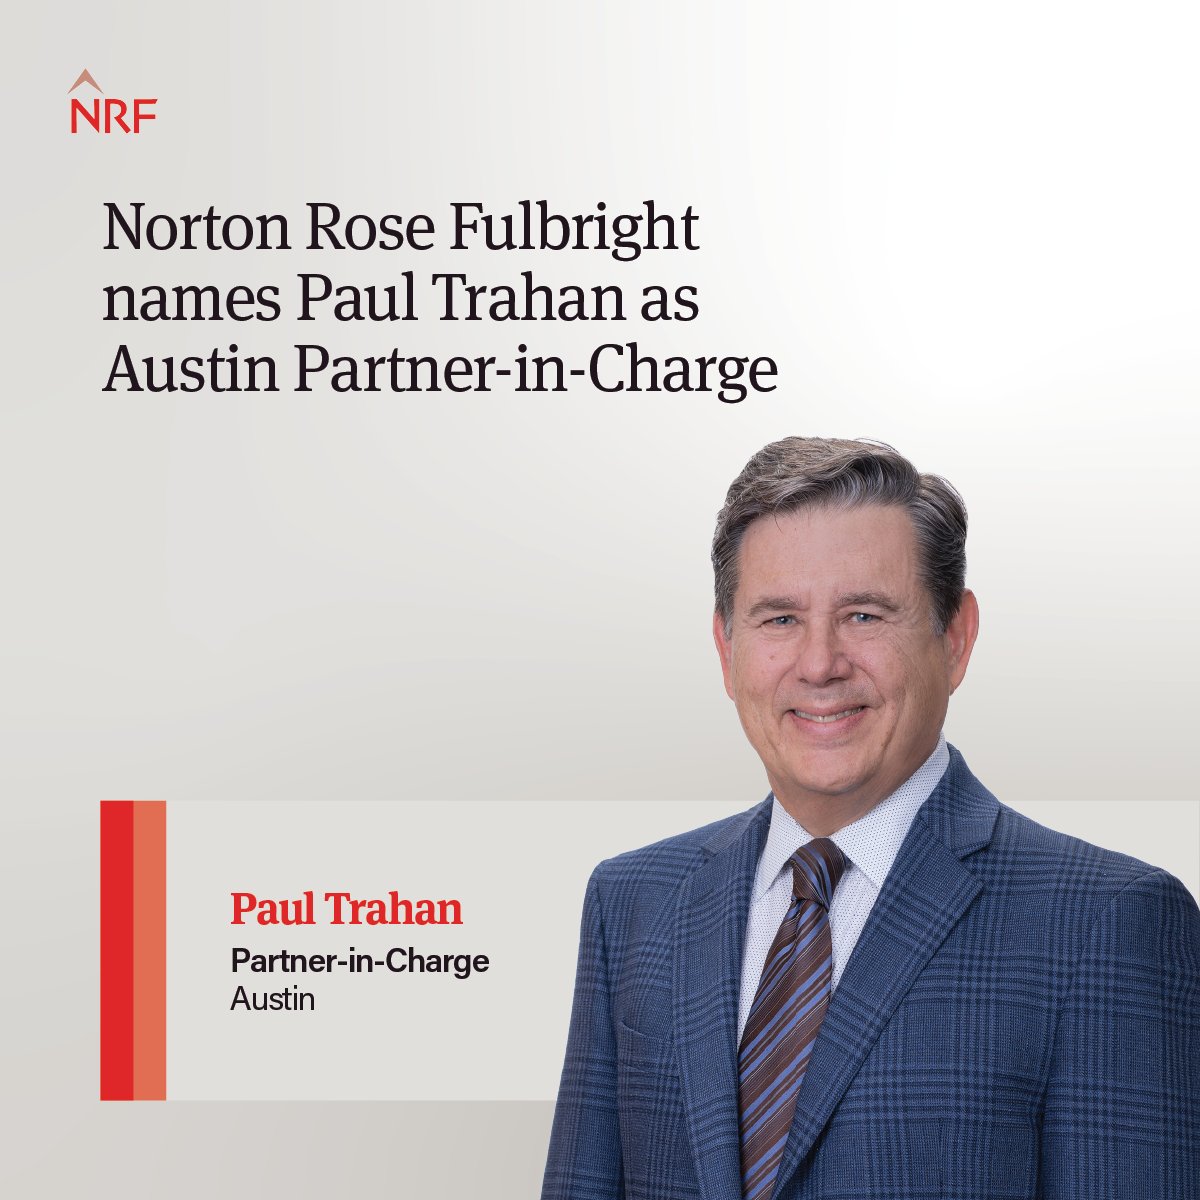 We’re excited to announce that Paul Trahan has been appointed as the Partner-in-Charge of our Austin office. ow.ly/RQ1j50RxmeG